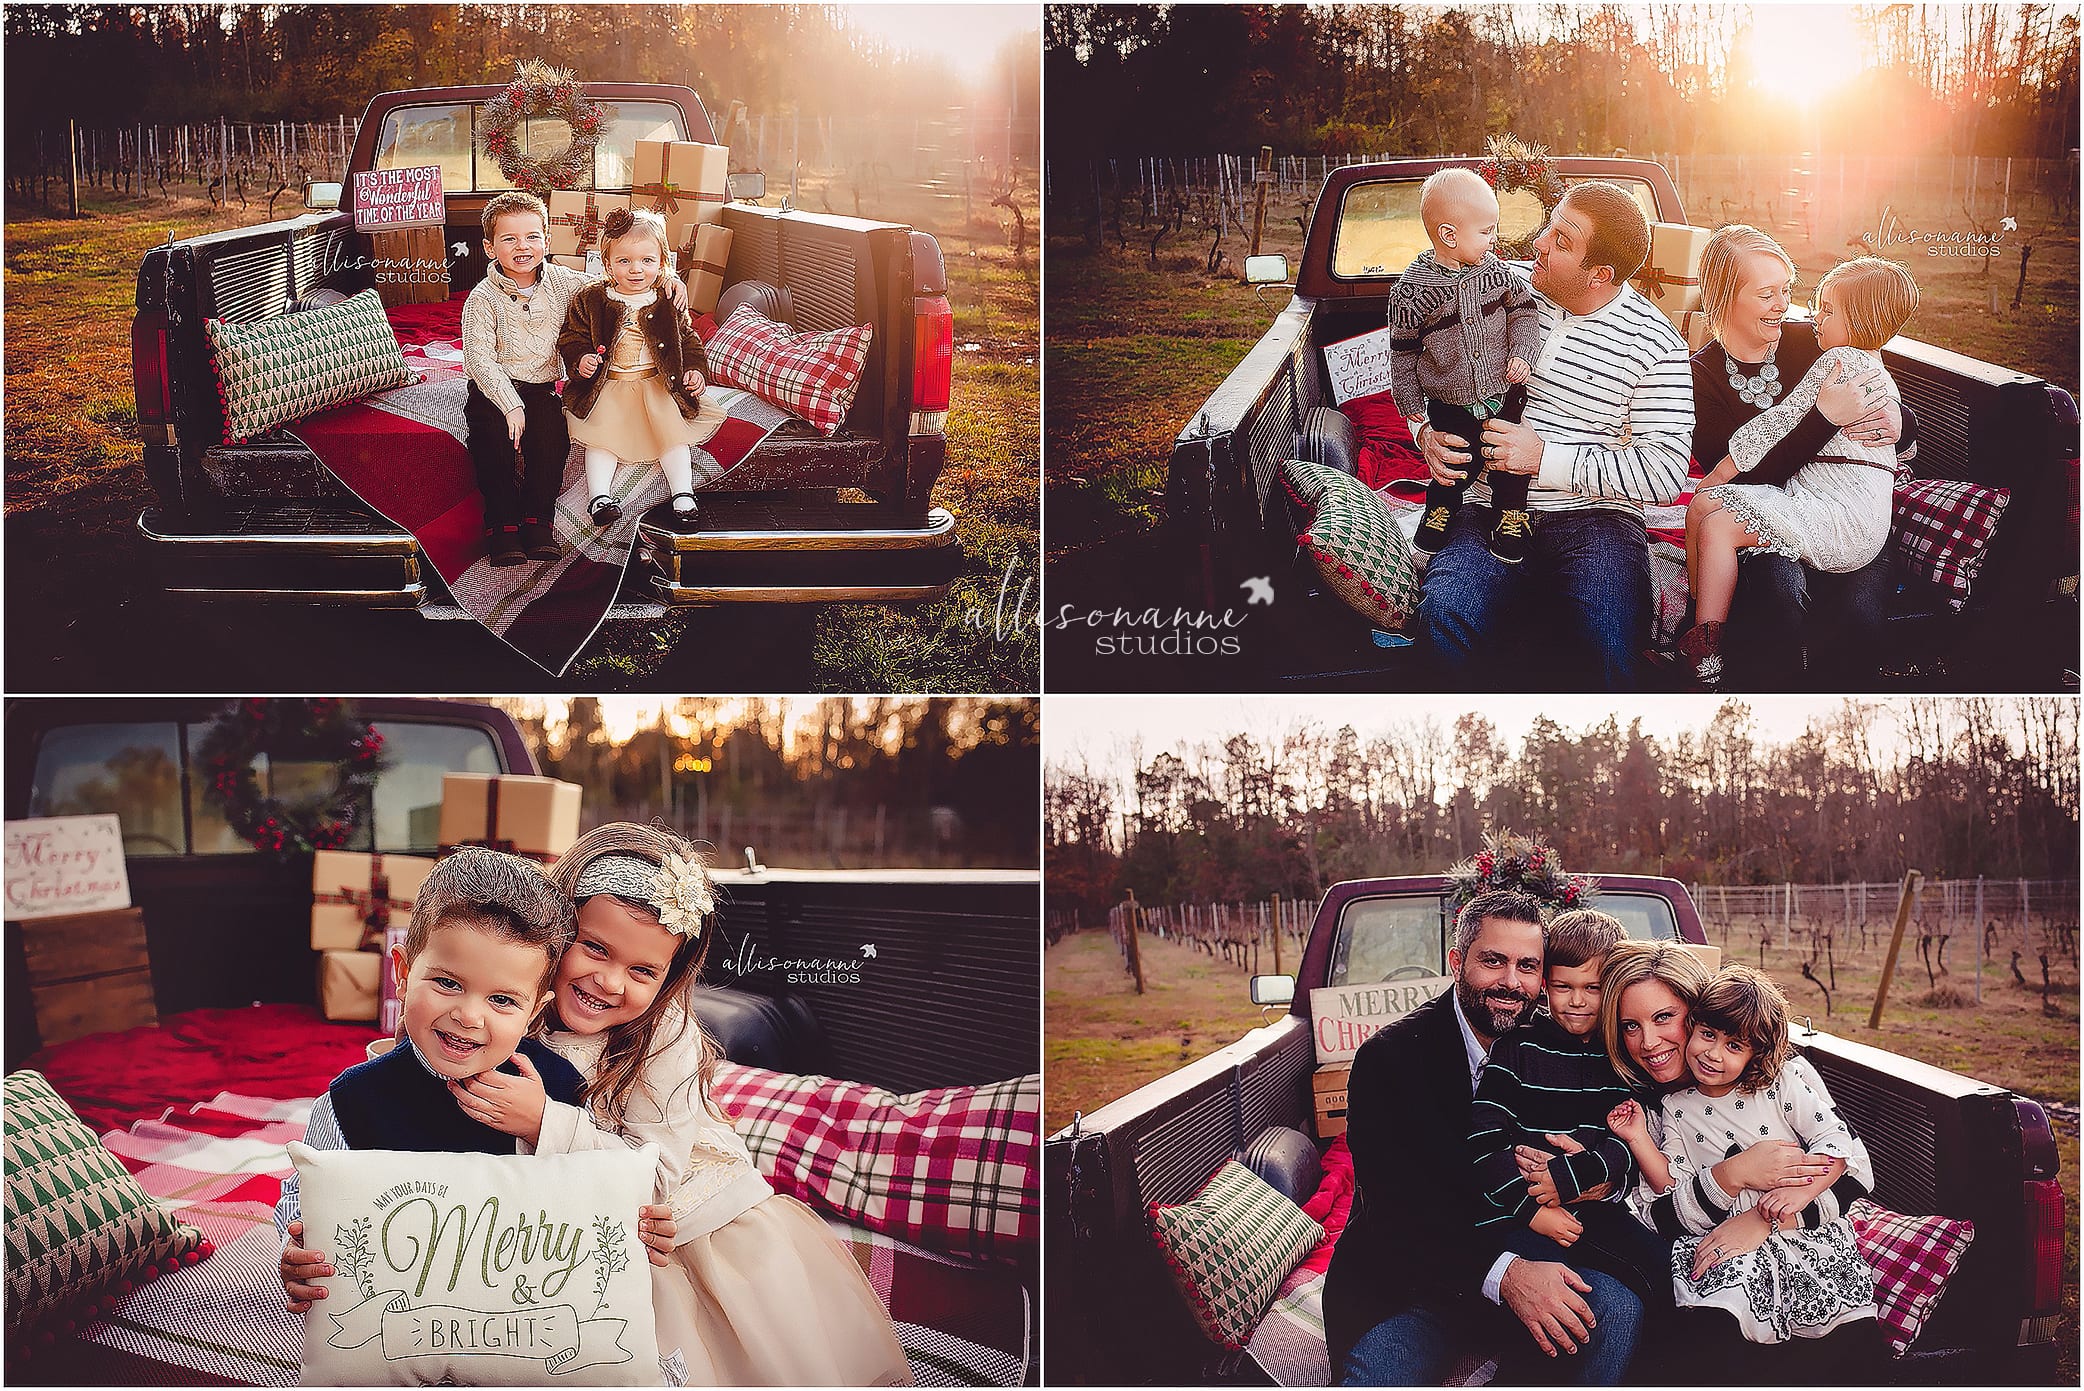 Old Truck, Vintage, Ford Trucks, Hammonton, Holiday Minis, Amalthea Cellars Winery, Happy Holidays, Merry Christmas, Family love, siblings, natural lighting, Allisonanne studios, Allison Gallagher, Best Photographer South Jersey